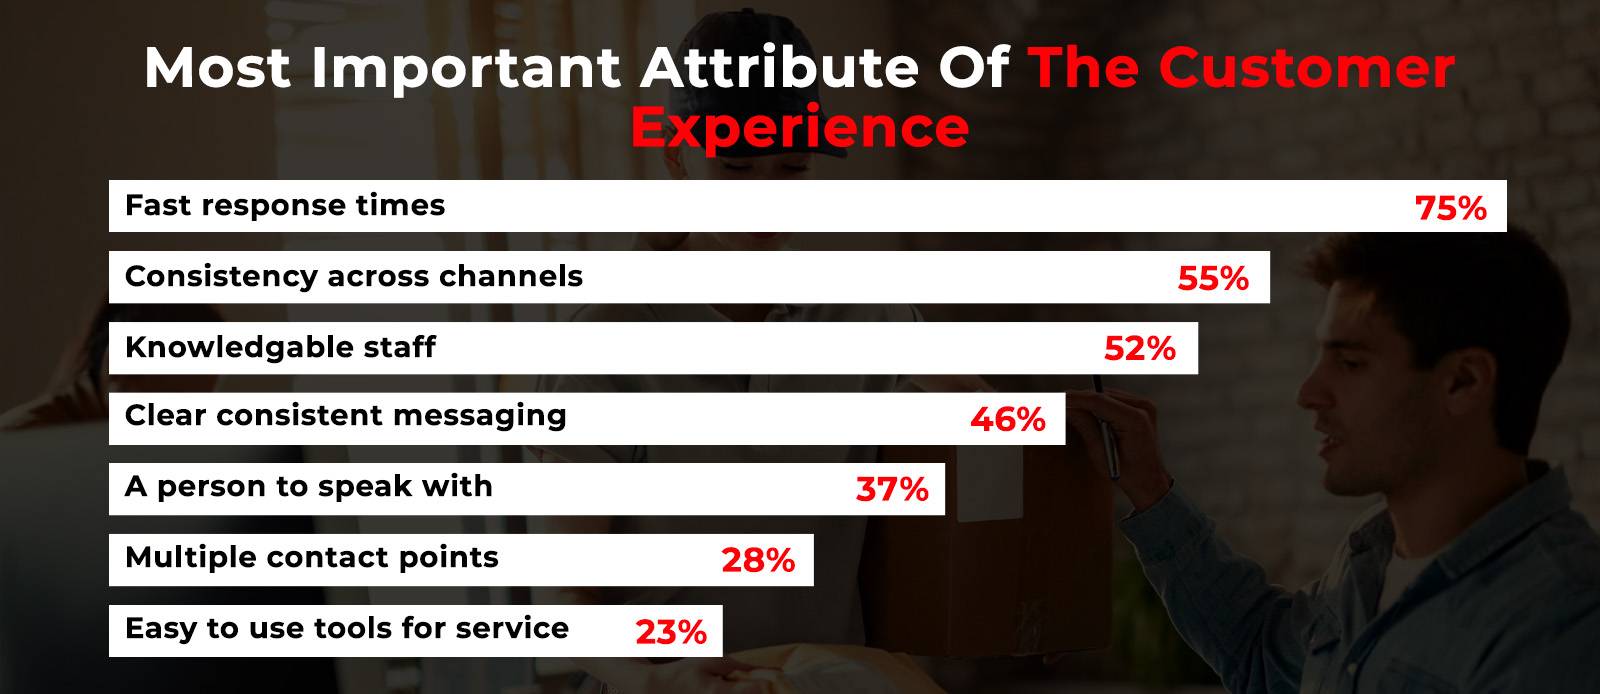 Most important attributes for customer experience